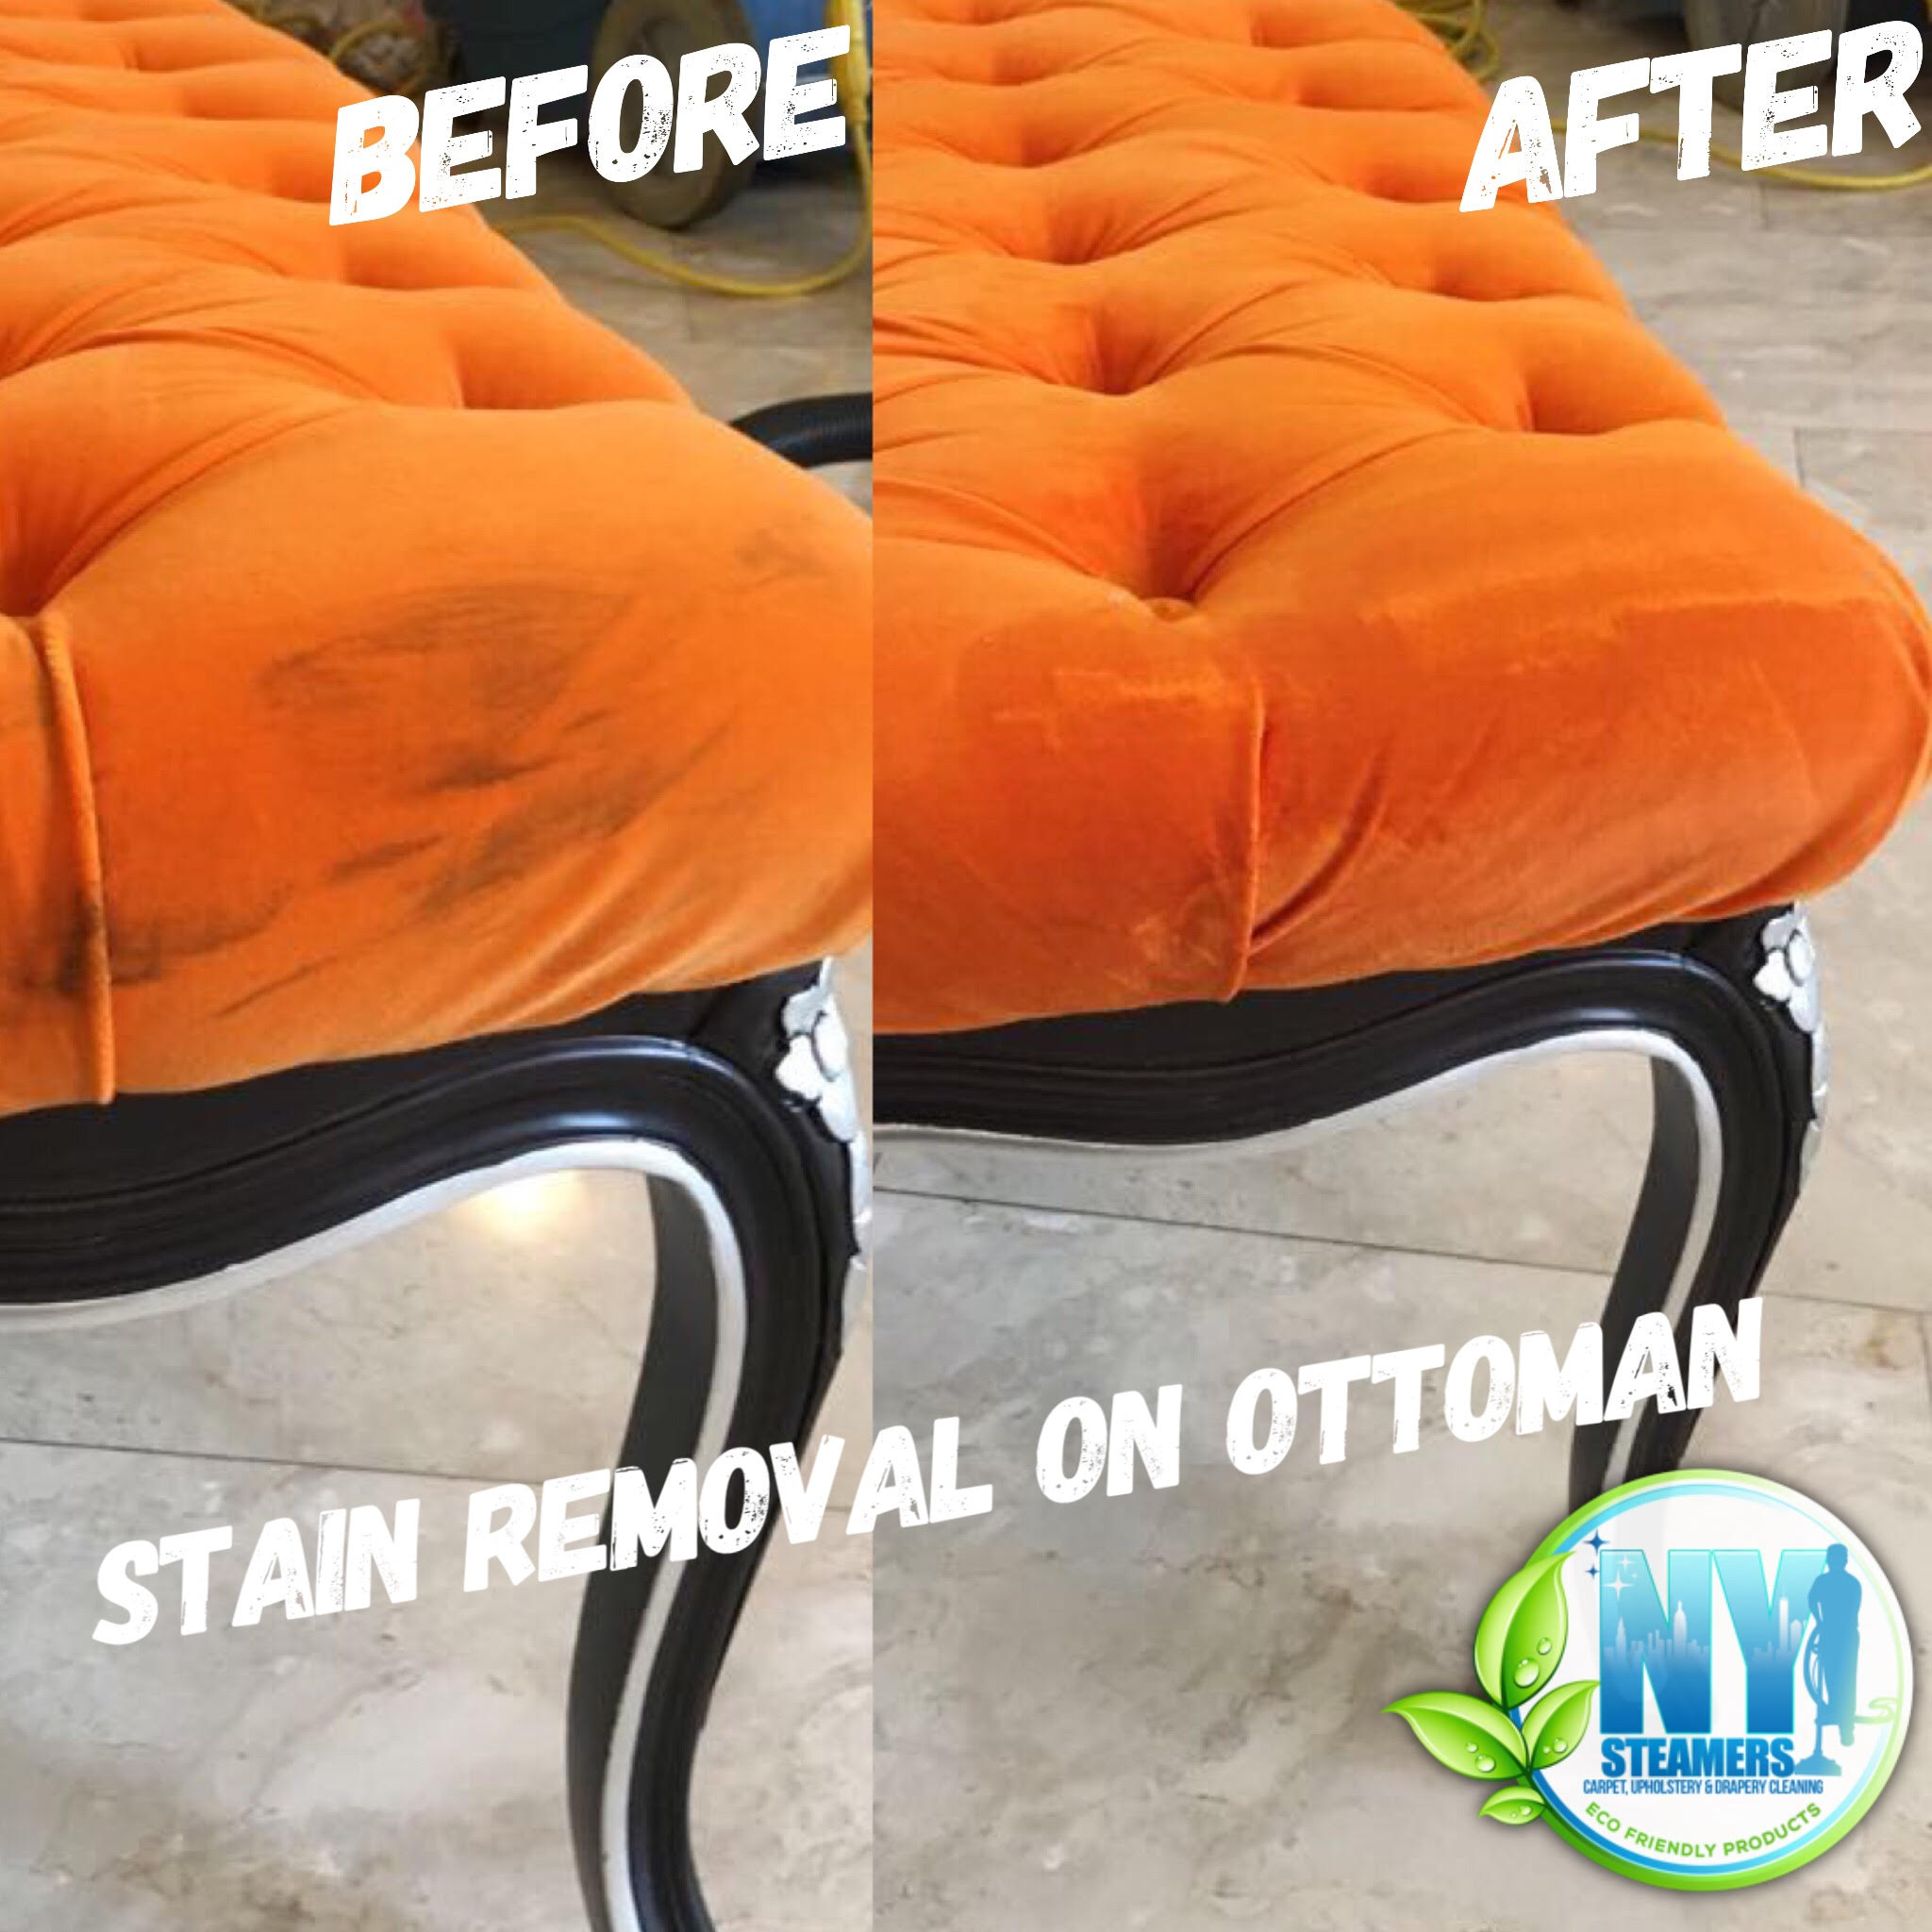 Stain Removal on Ottoman, Ottoman Cleaning, Furniture Cleaning, Sofa Cleaning, Color Restoration